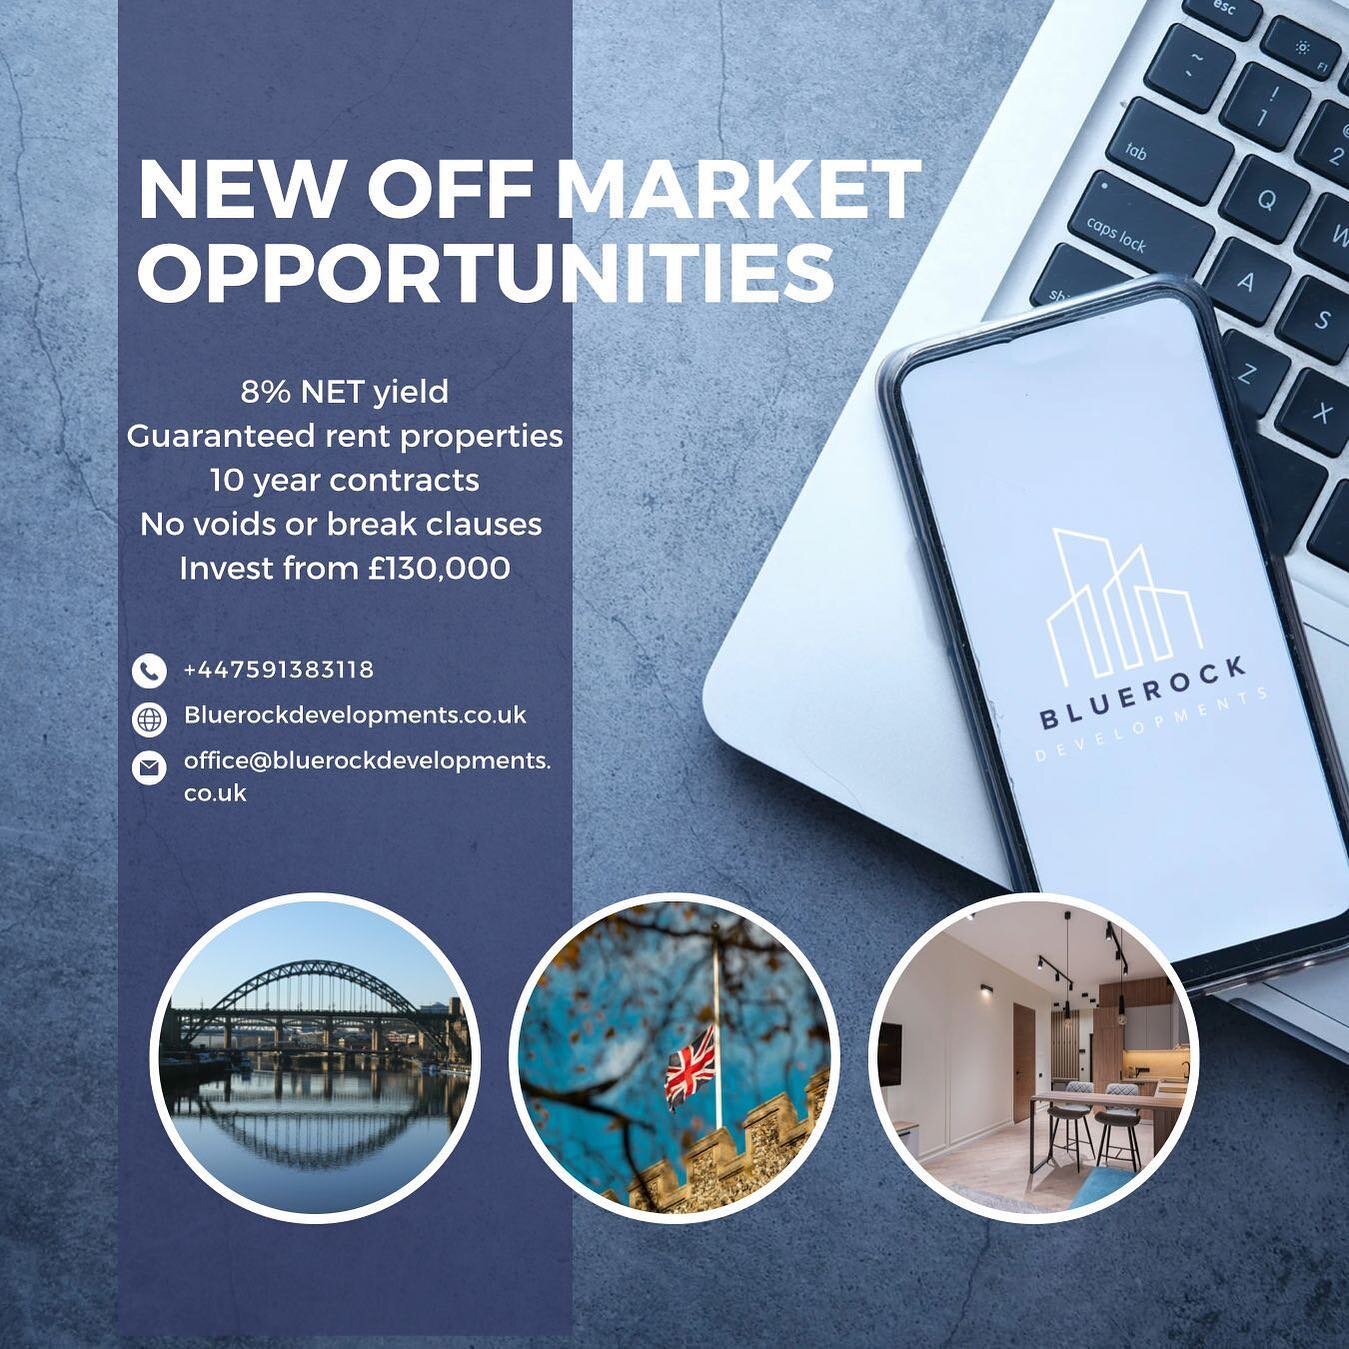 Bluerock Developments are delighted to offer a wide variety of new off market property investment opportunities for investors looking for a secure, guaranteed return! 

A large proportion of our clients are looking to invest in social housing due to 